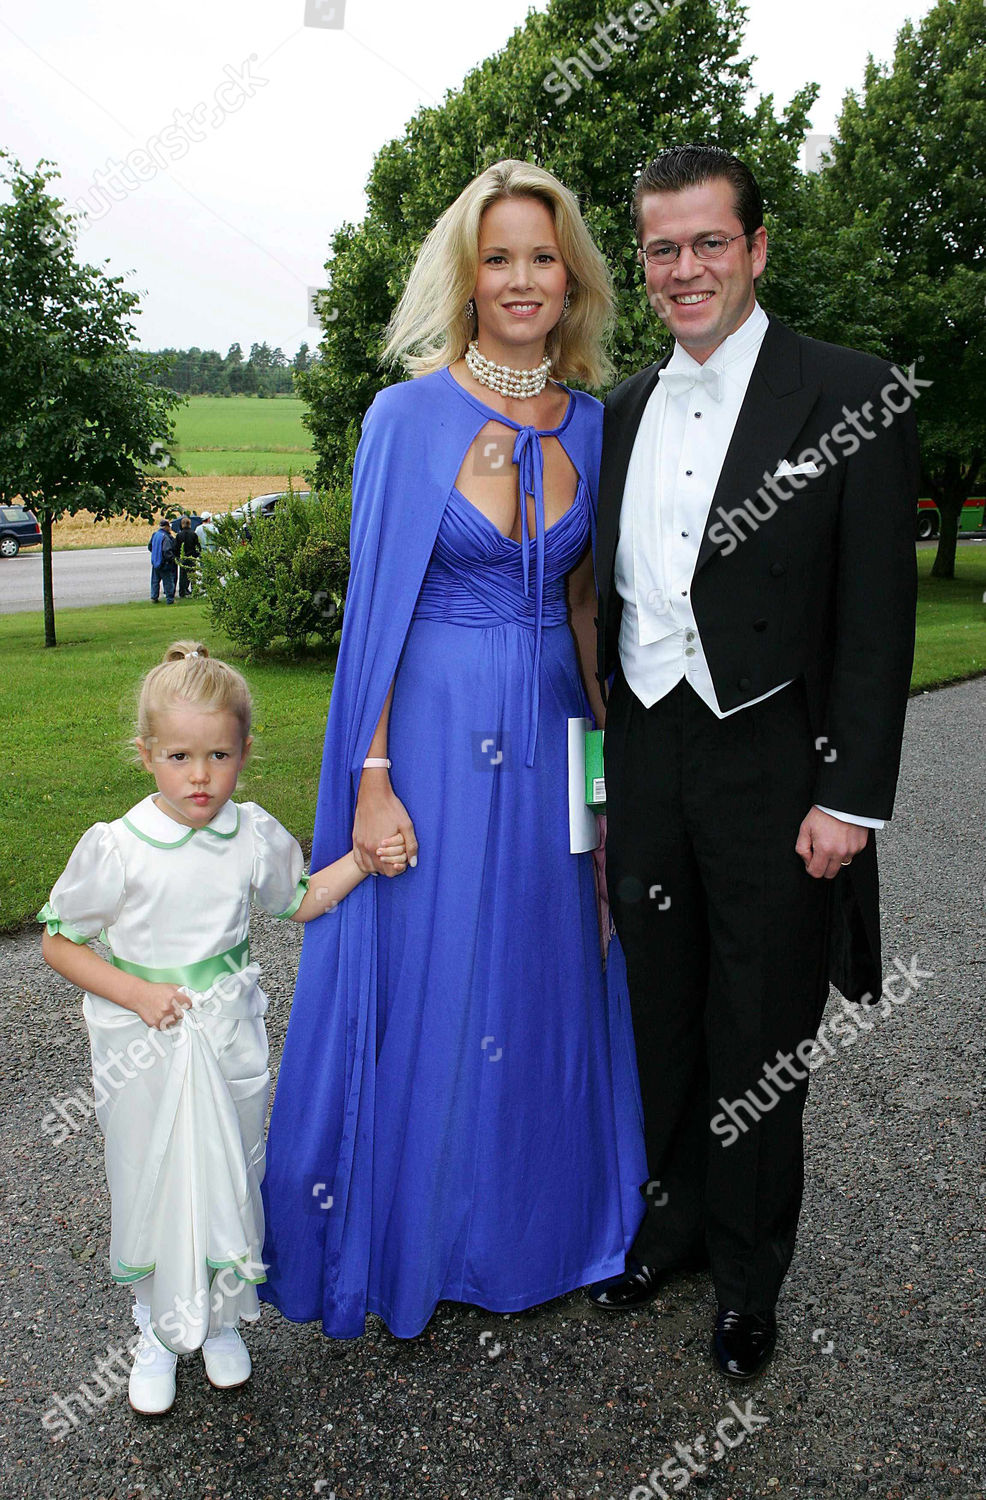 https://editorial01.shutterstock.com/wm-preview-1500/538876x/6ab55ed5/the-wedding-of-princess-anna-of-sayn-wittgenstein-berleburg-and-prince-manuel-of-bavaria-in-stigtoma-near-nykoeping-sweden-shutterstock-editorial-538876x.jpg